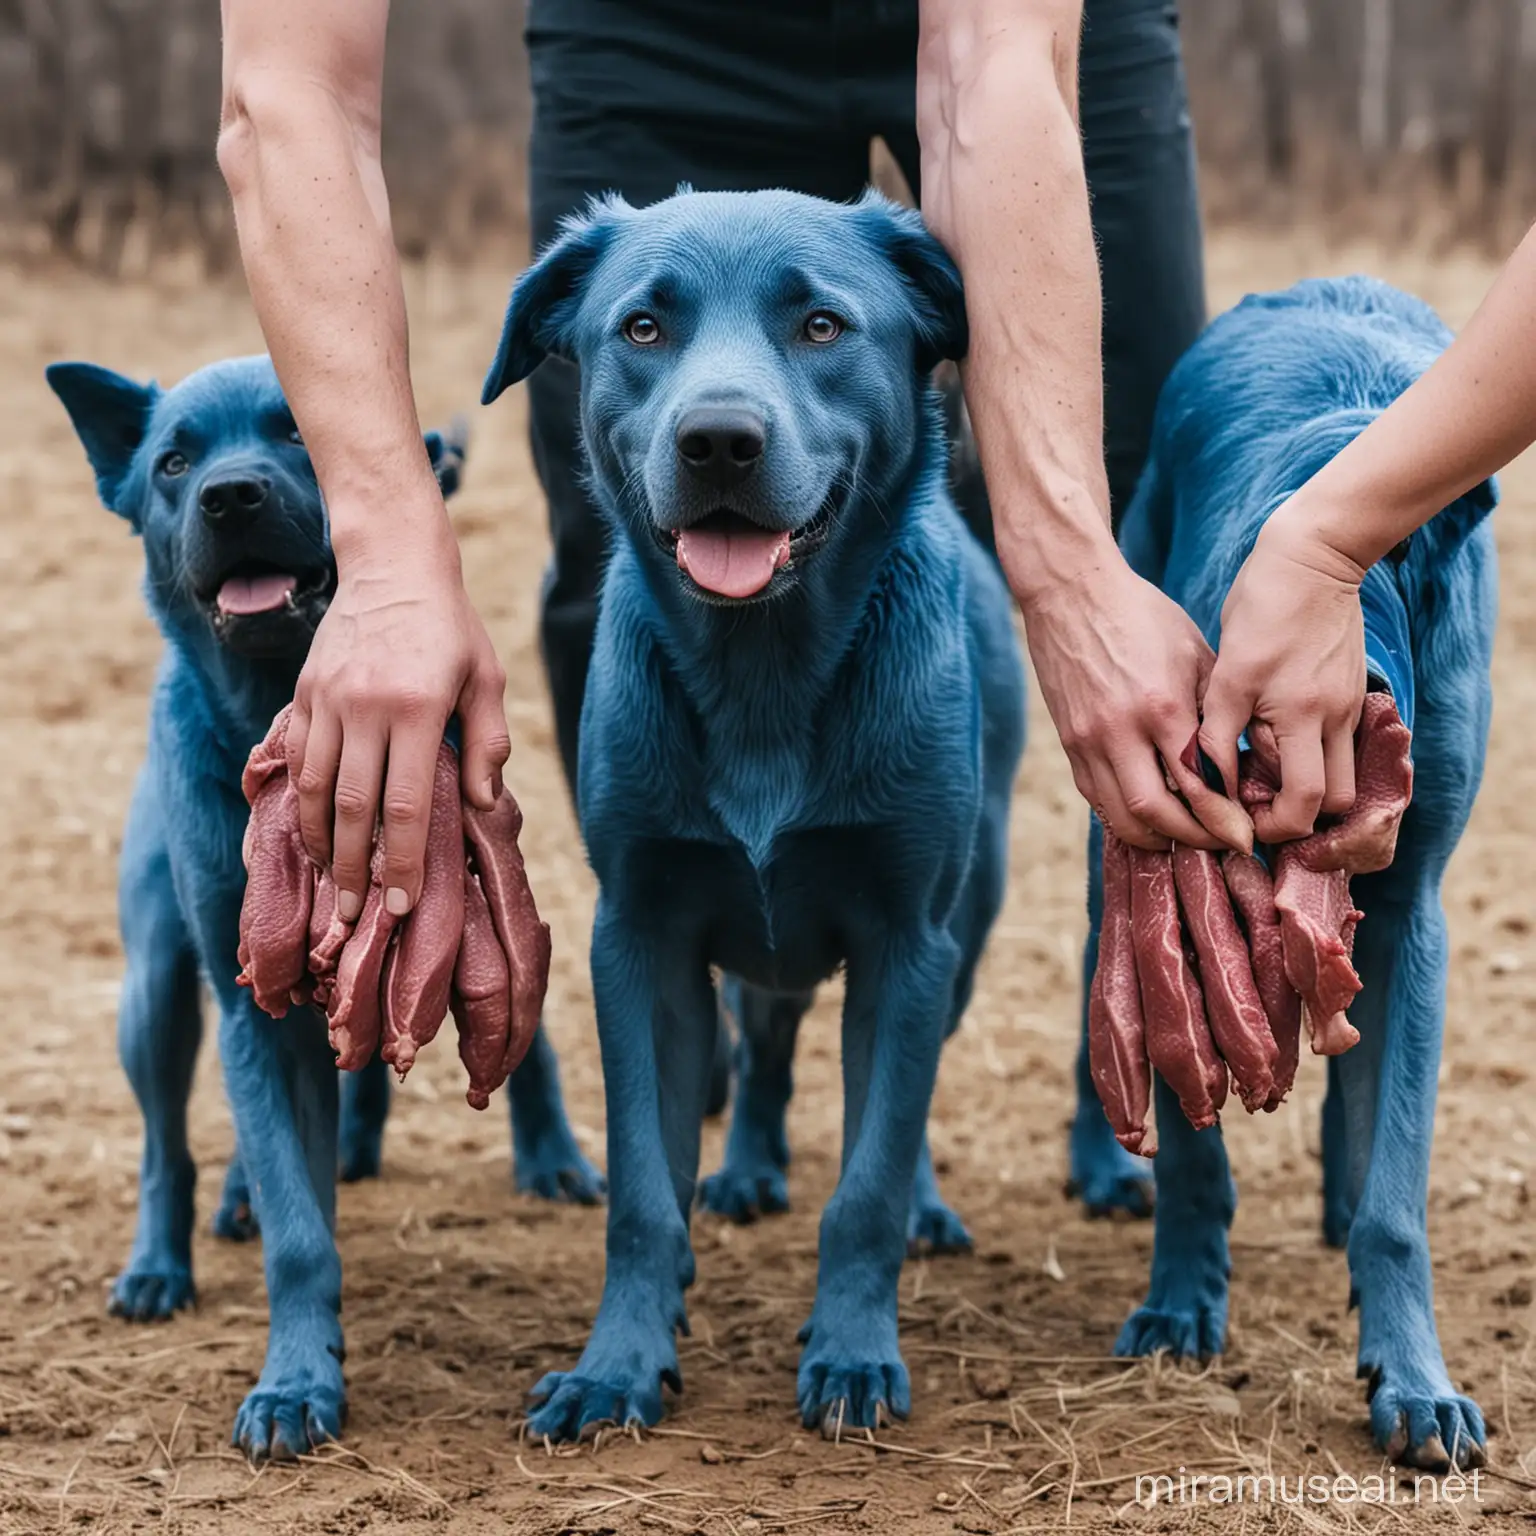 Putting meat in the hands of blue dogs